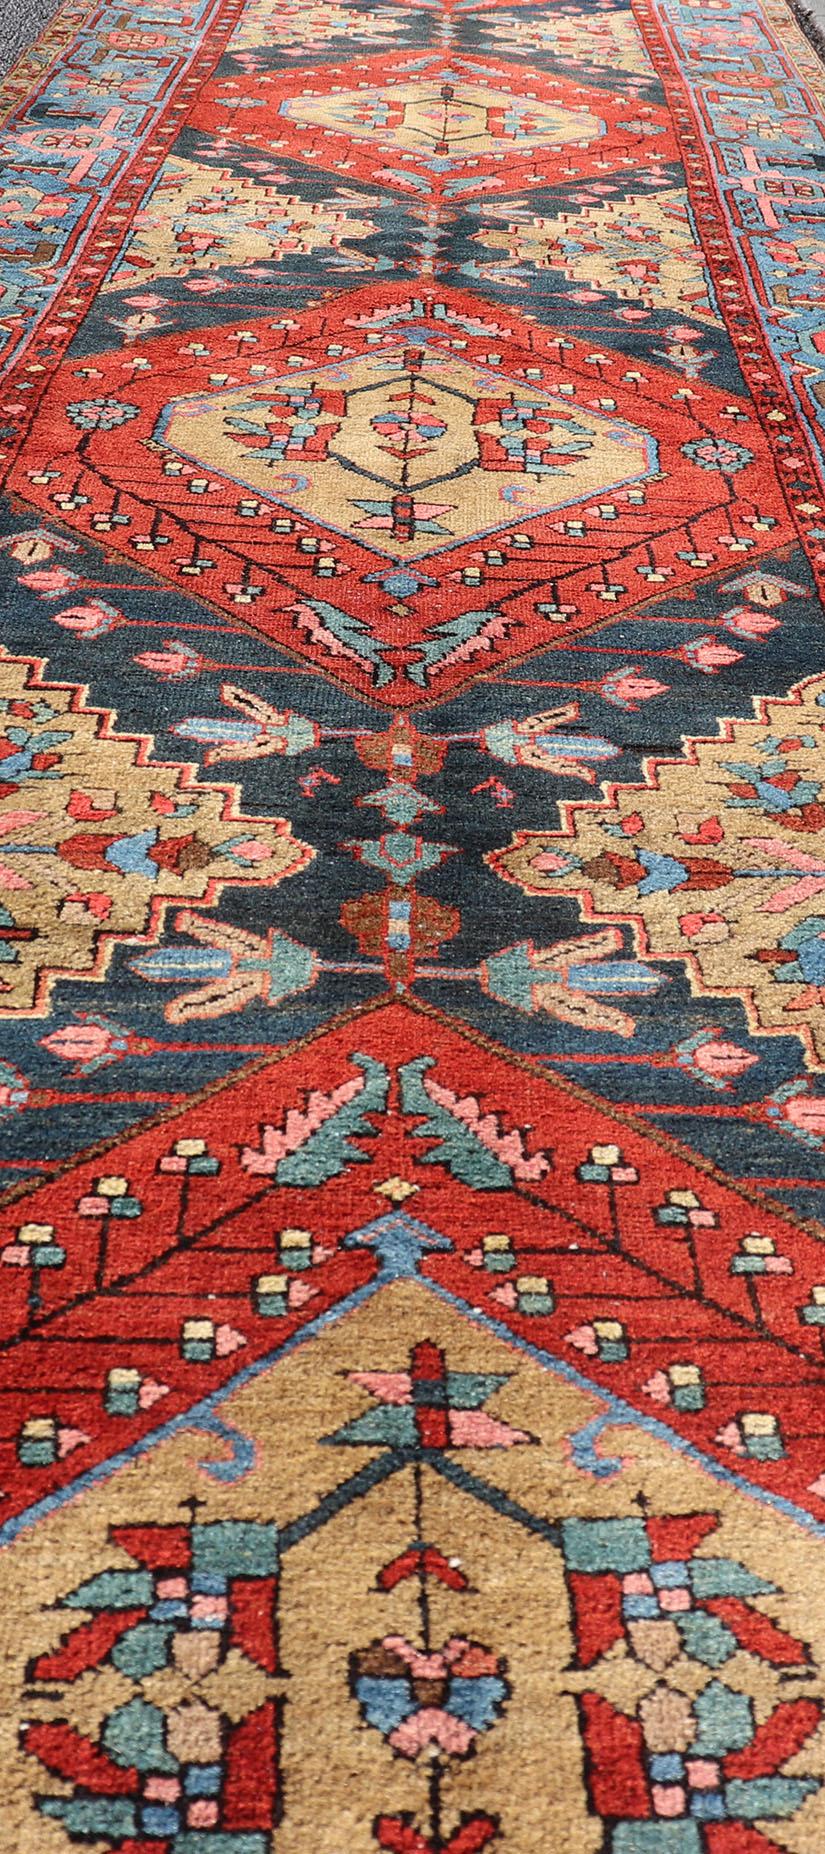 Antique Geometric Persian Long Heriz Runner in Red, Blue, Yellow, and Tan For Sale 2